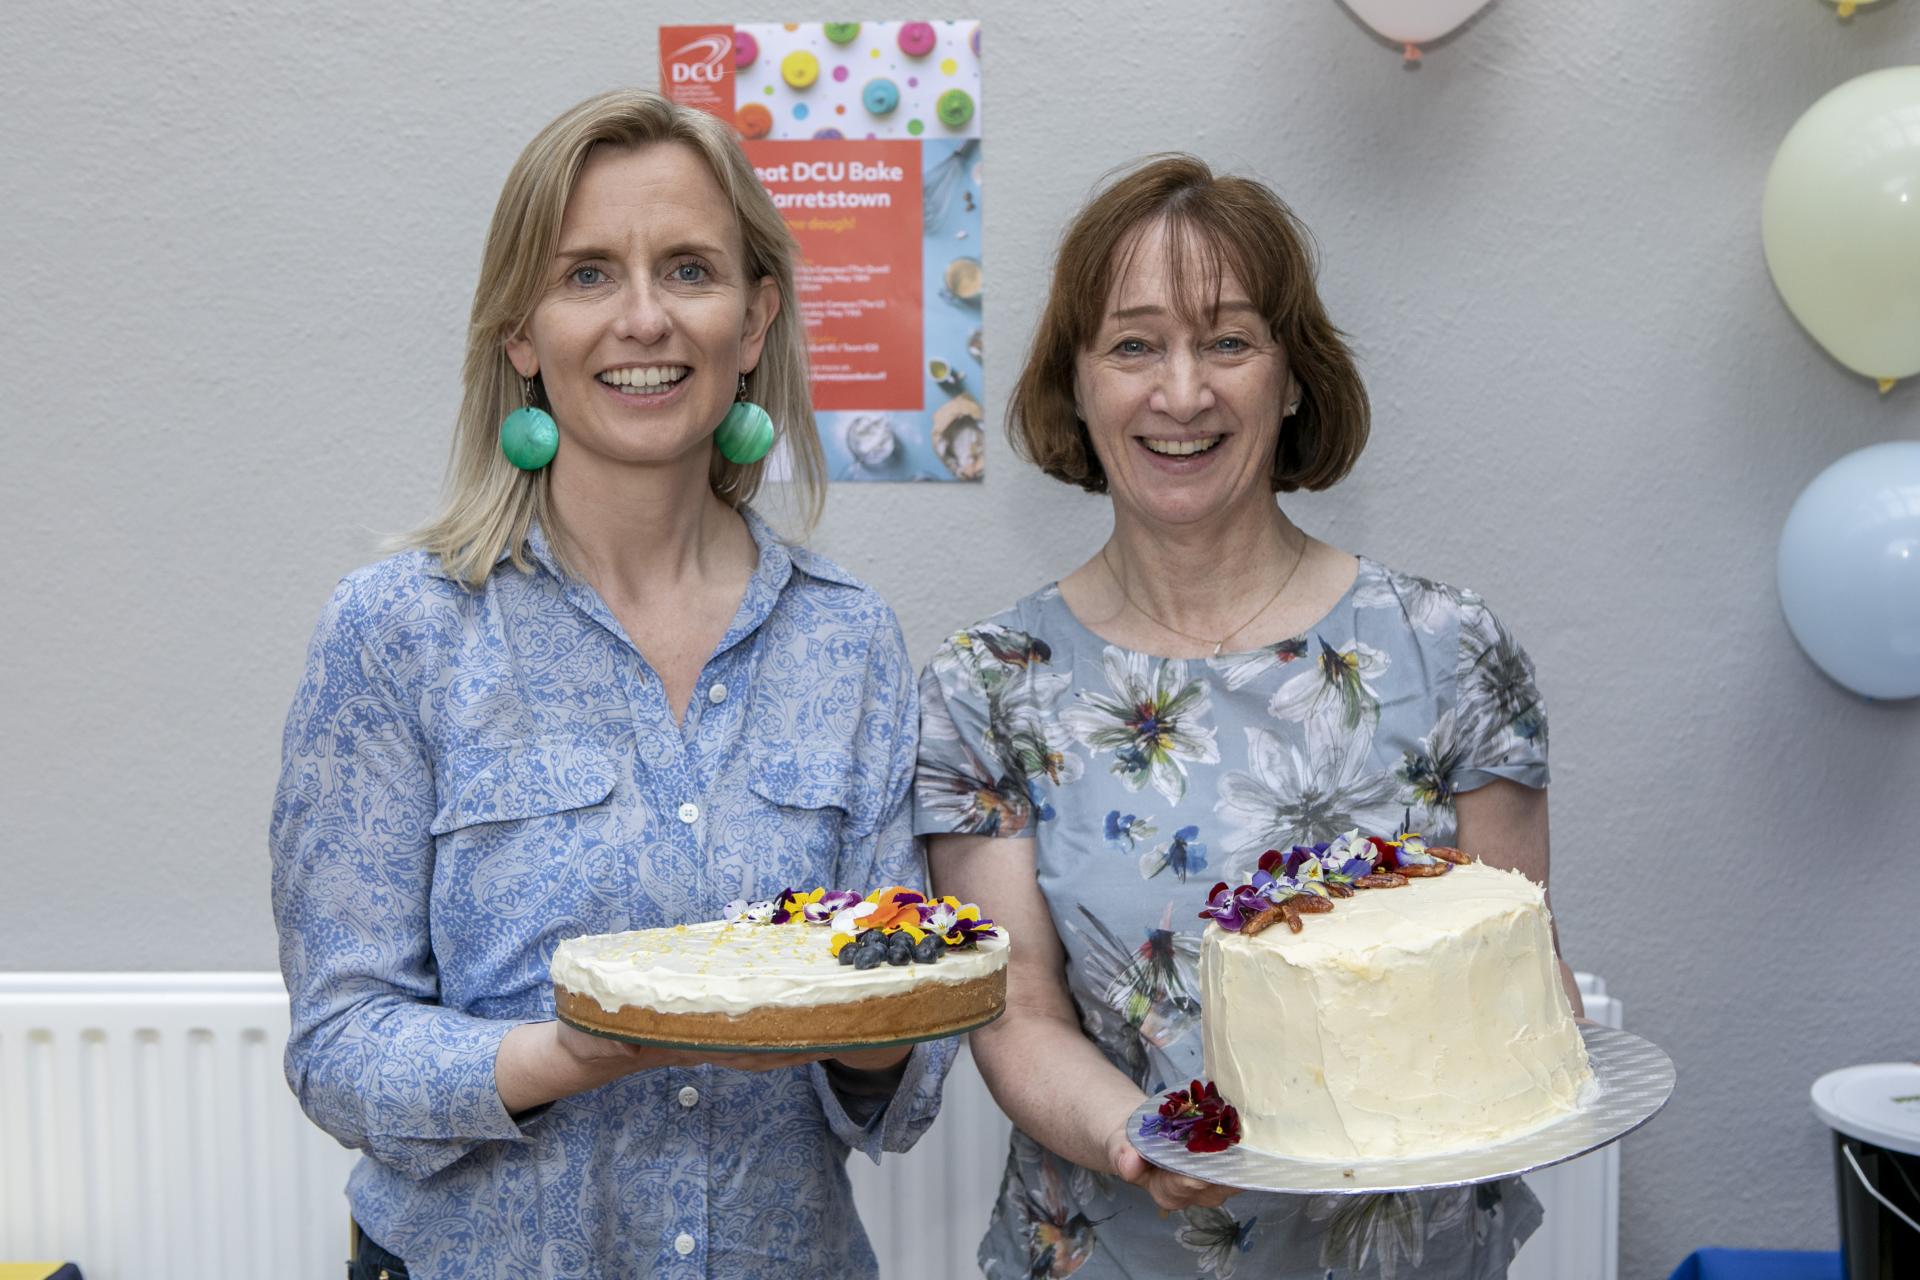 Shows staff at DCU Bake off for Barretstown event 